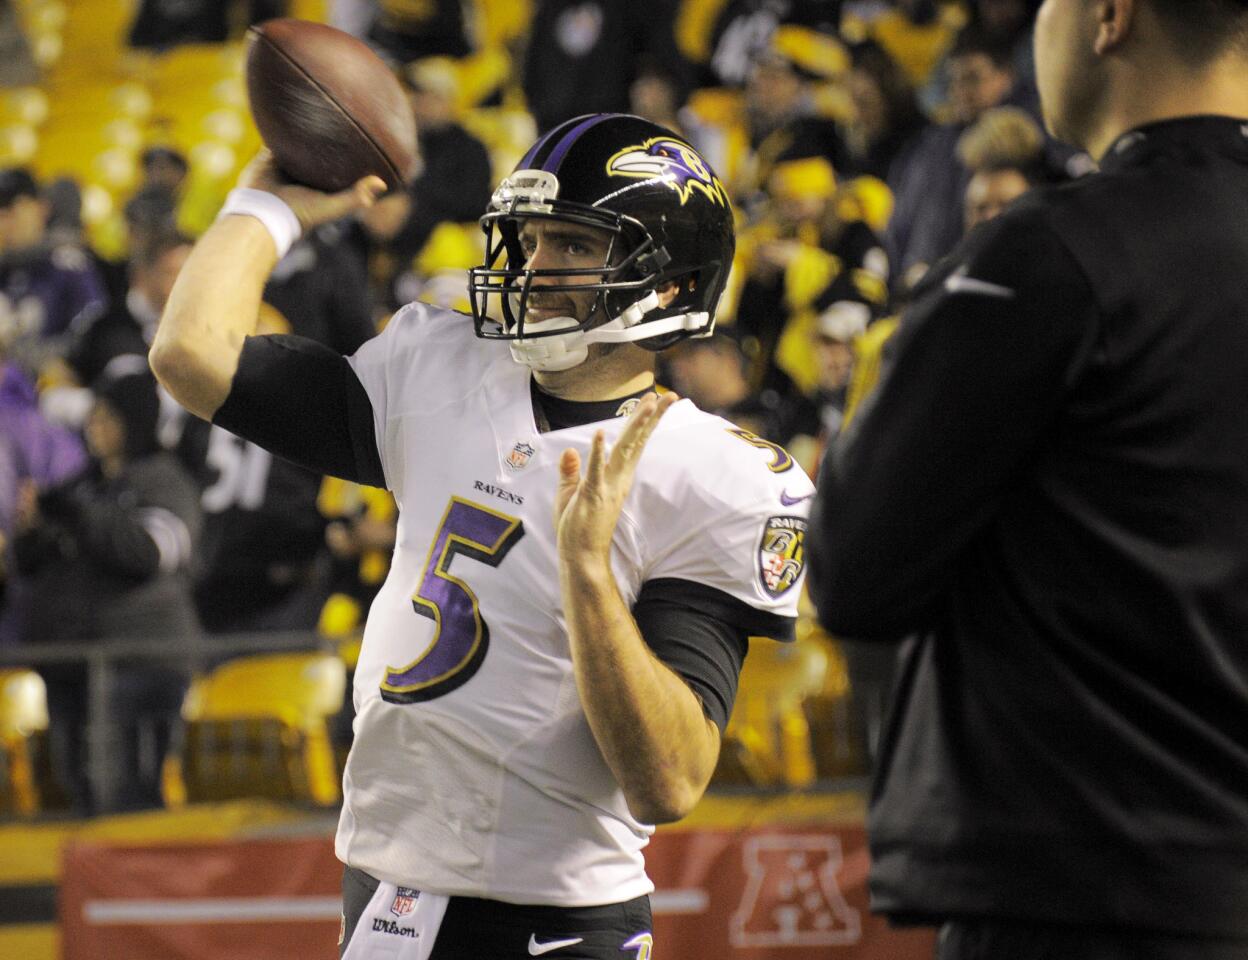 Joe Flacco managed the game well. When he had time, he made some crucial throws, but he also had some of those moments and made some questionable decisions. But overall, he played a solid game, and his elusiveness led to several big plays.